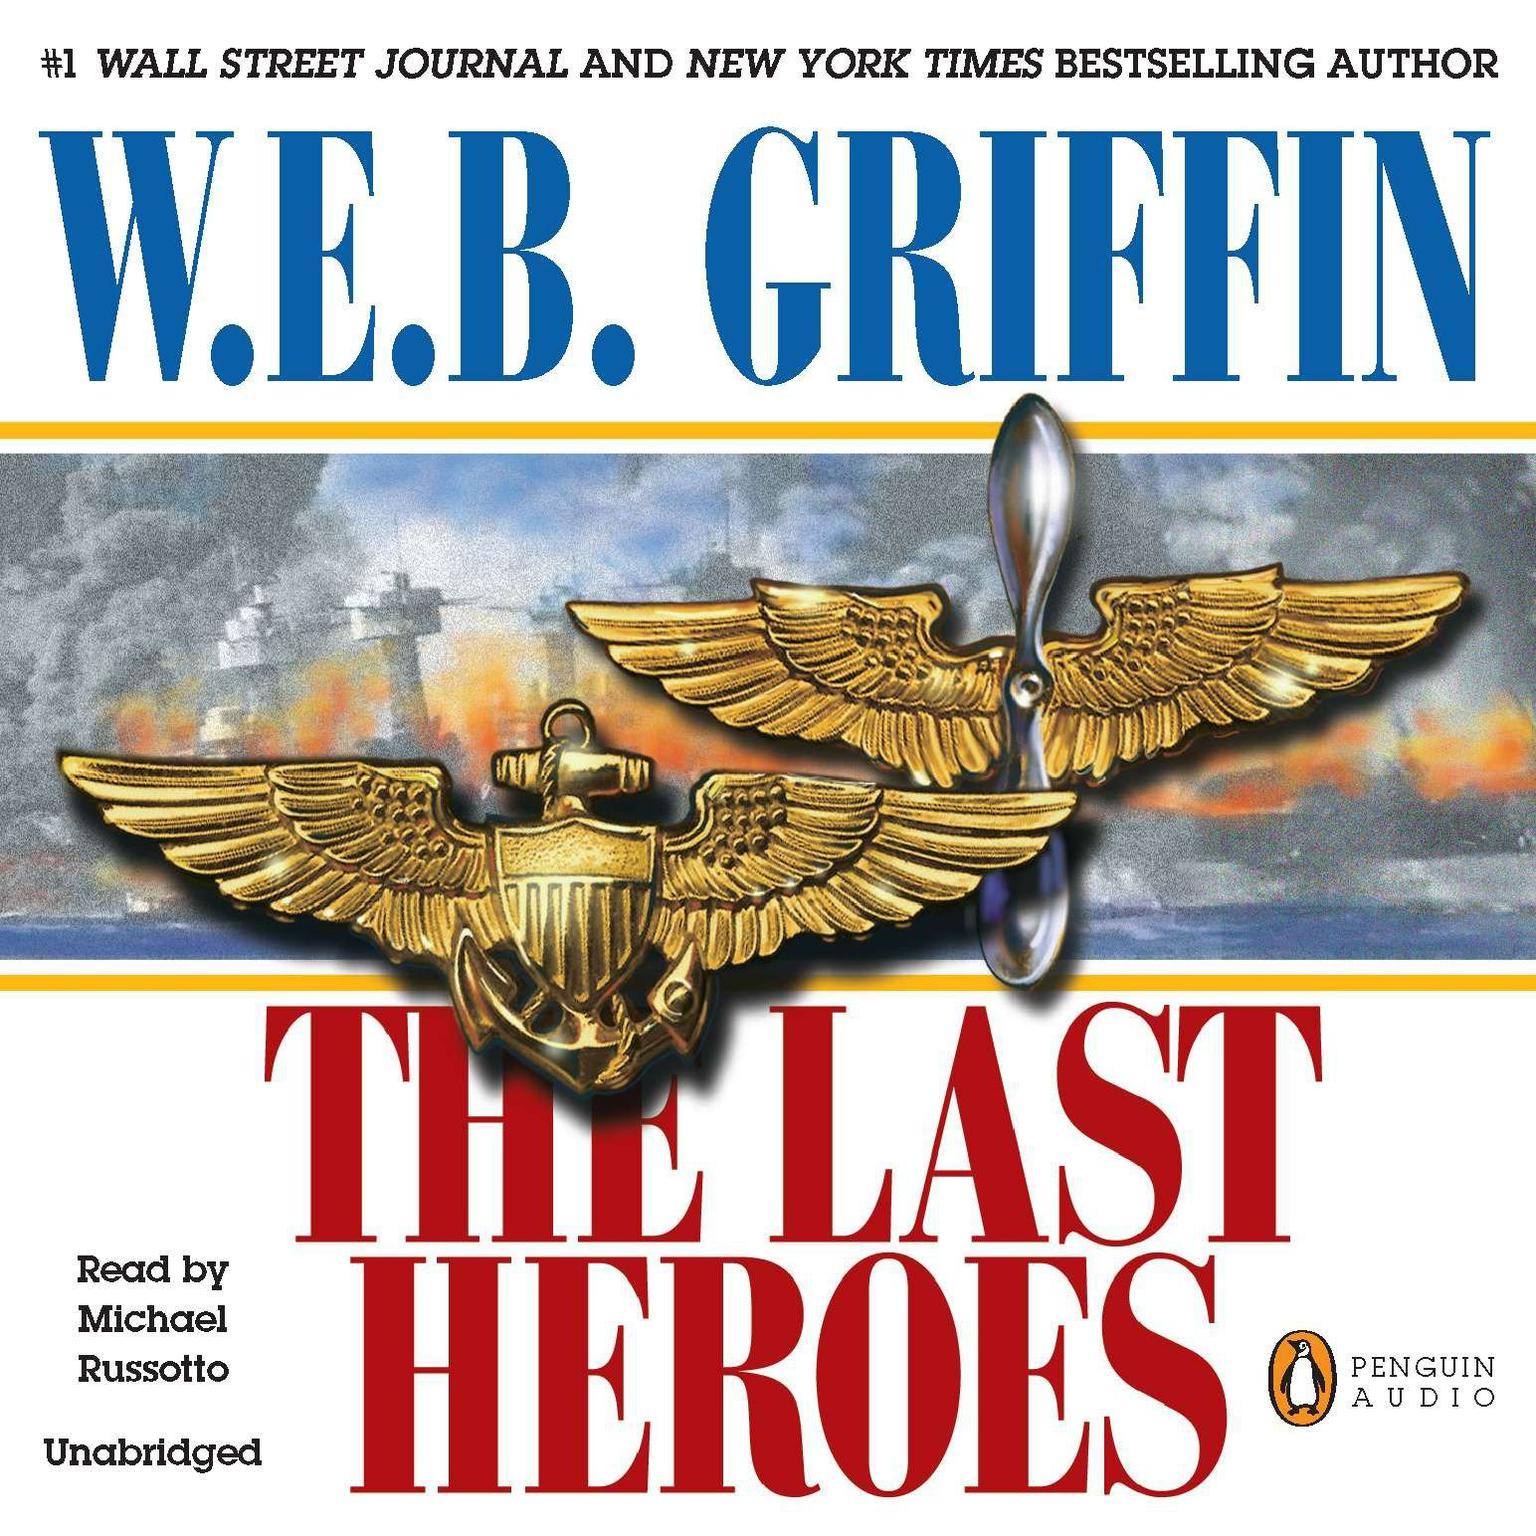 The Last Heroes: A Men at War Novel Audiobook, by W. E. B. Griffin